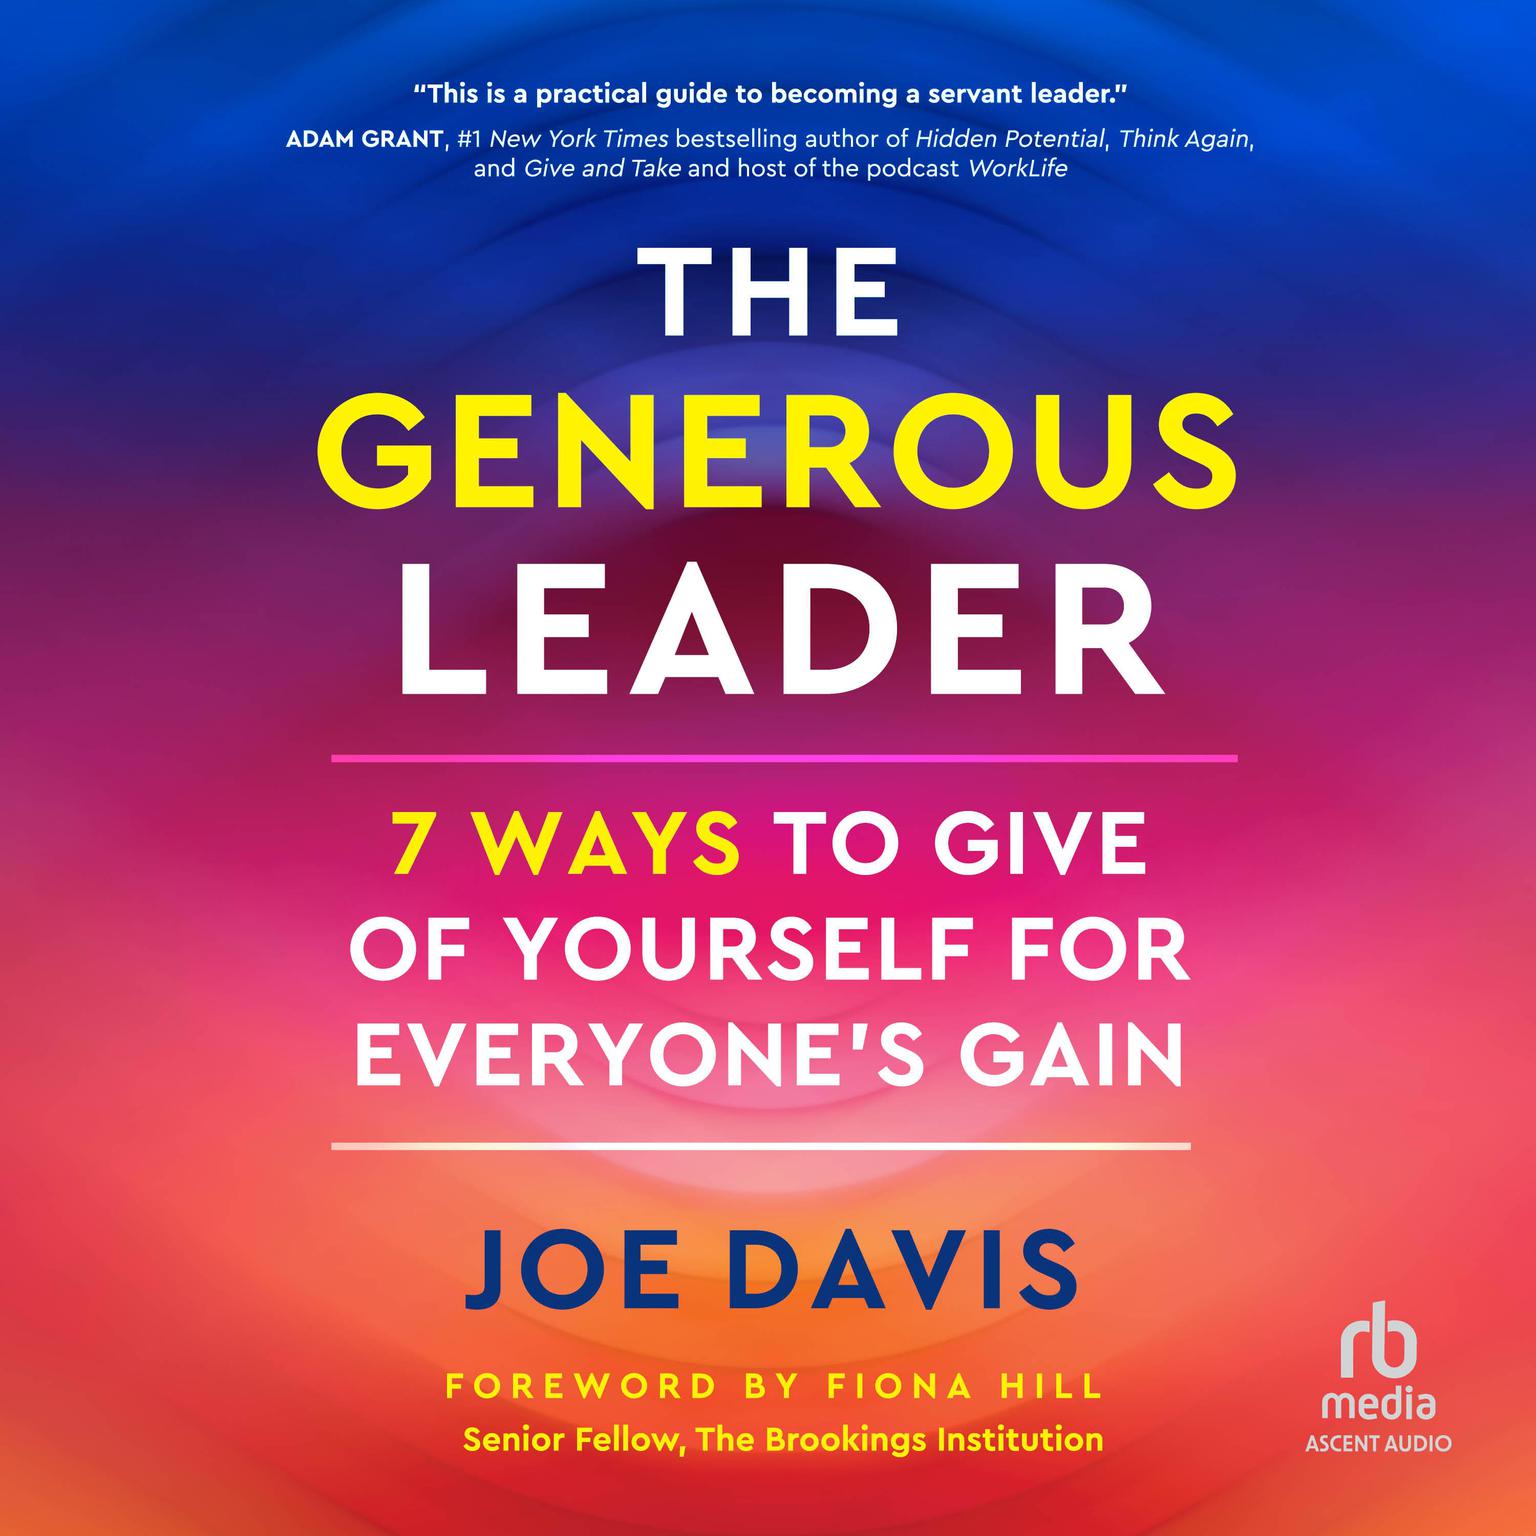 The Generous Leader: 7 Ways to Give of Yourself for Everyone’s Gain Audiobook, by Joe Davis